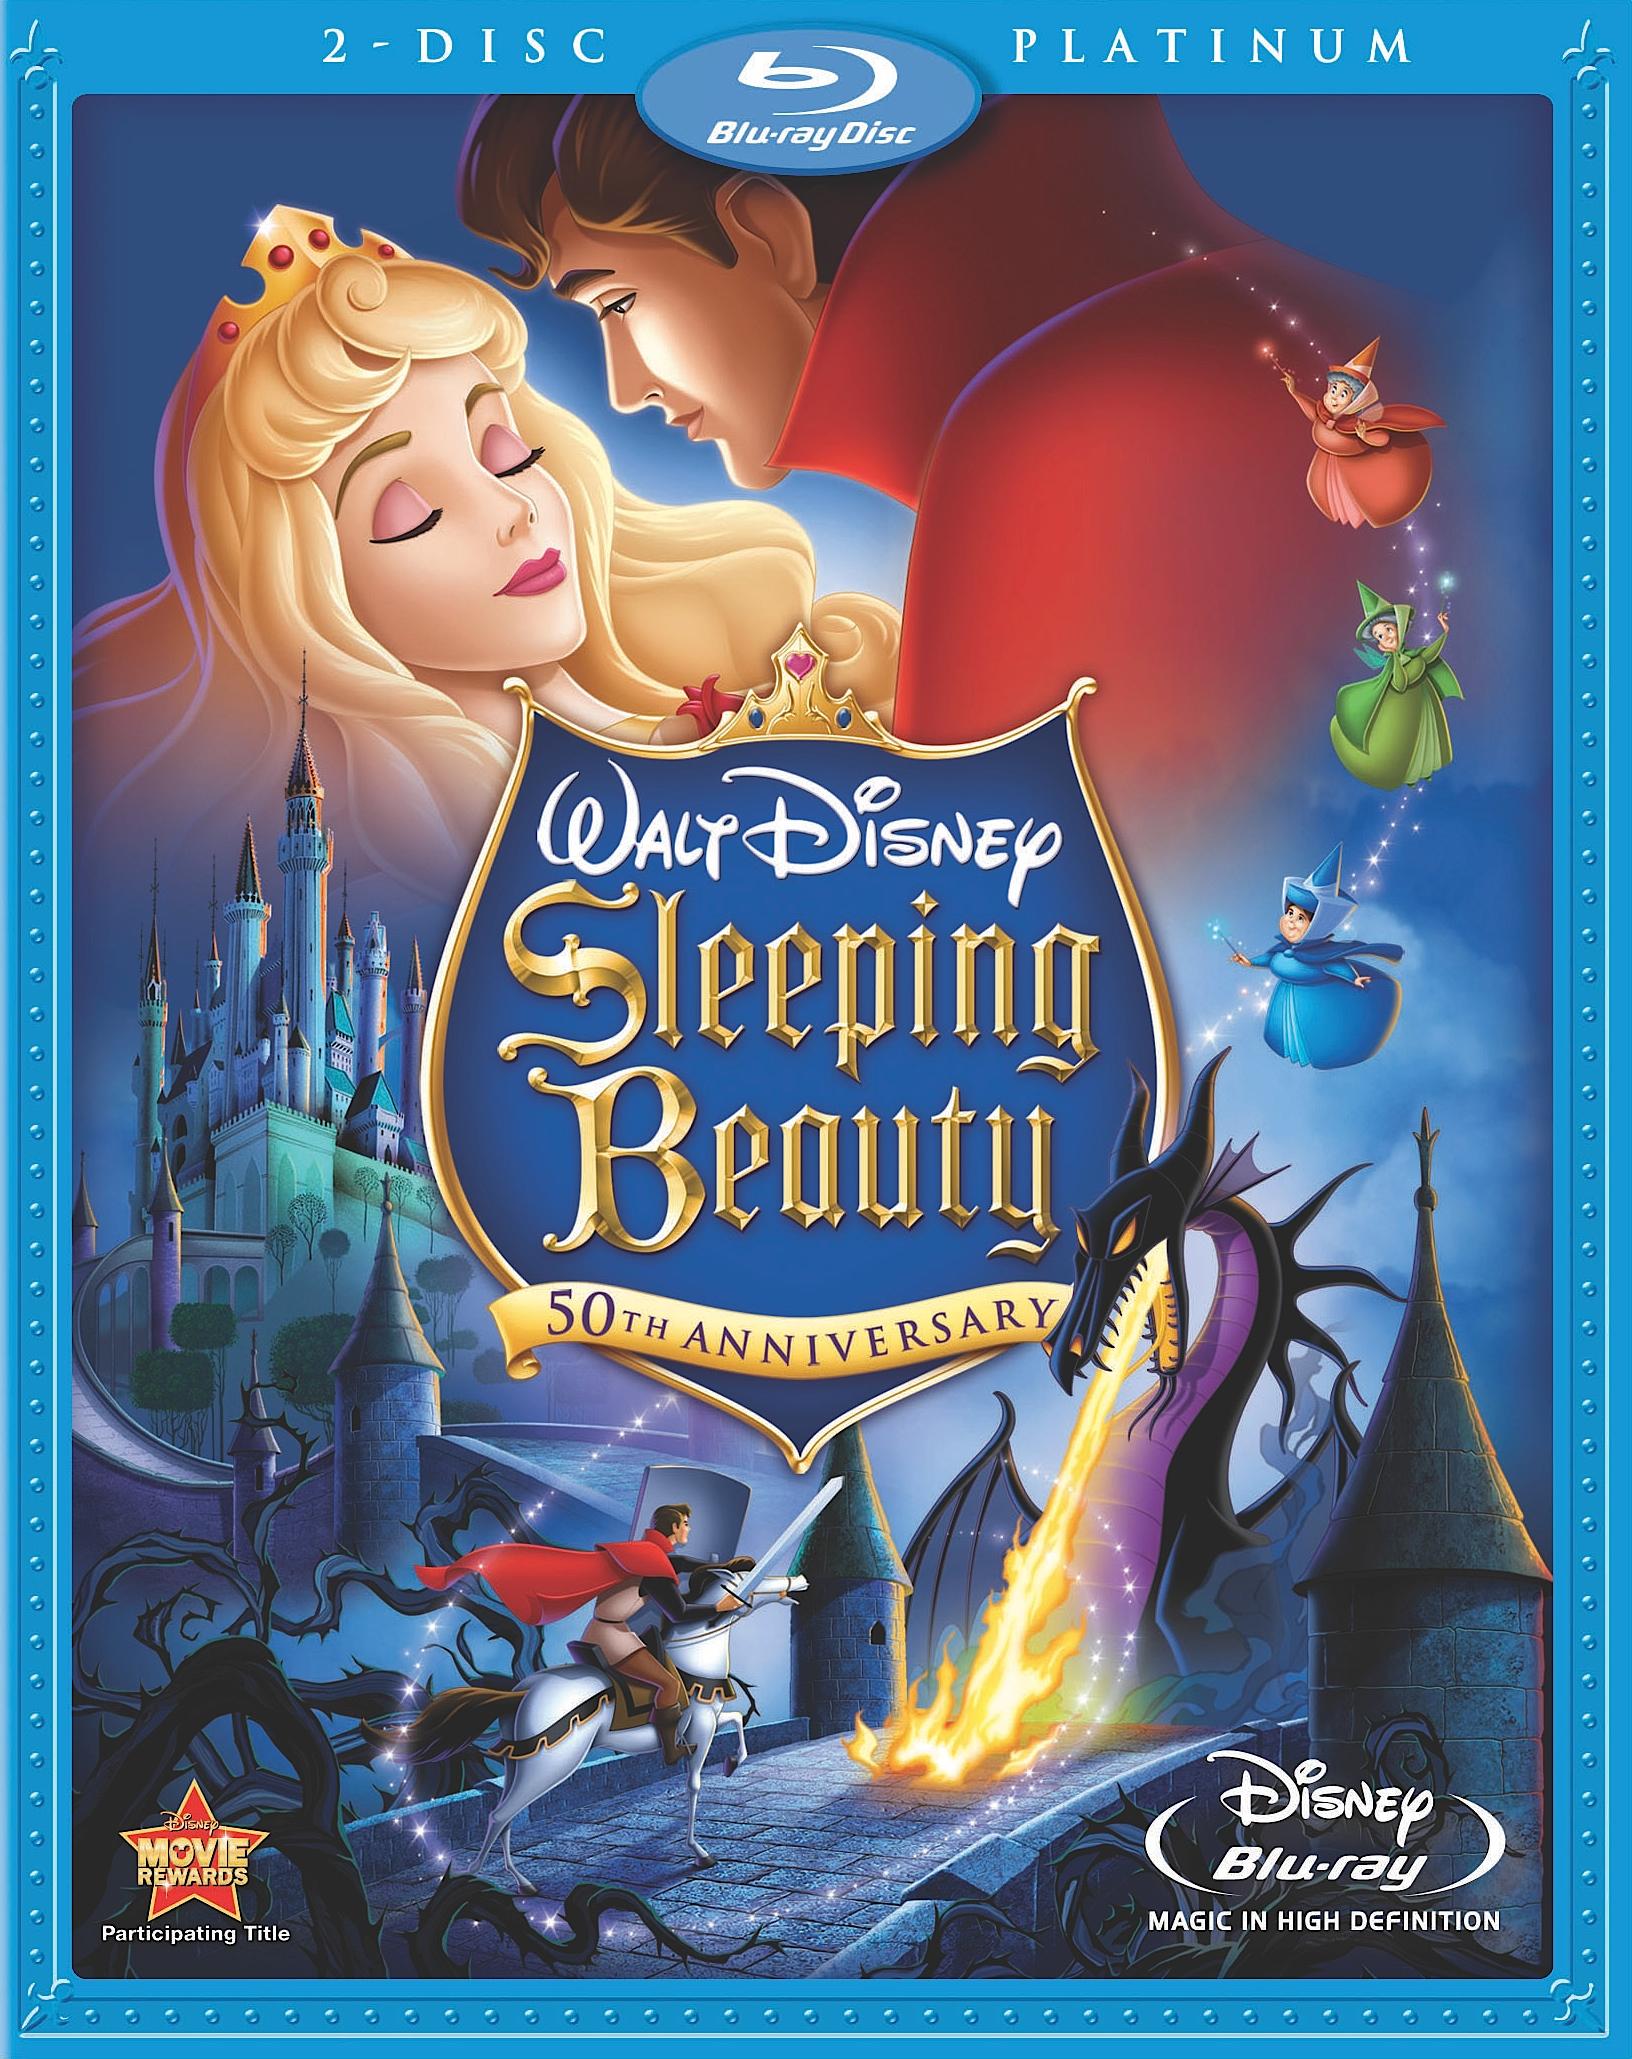 Sleeping Beauty (1959) Backgrounds, Compatible - PC, Mobile, Gadgets| 1632x2059 px